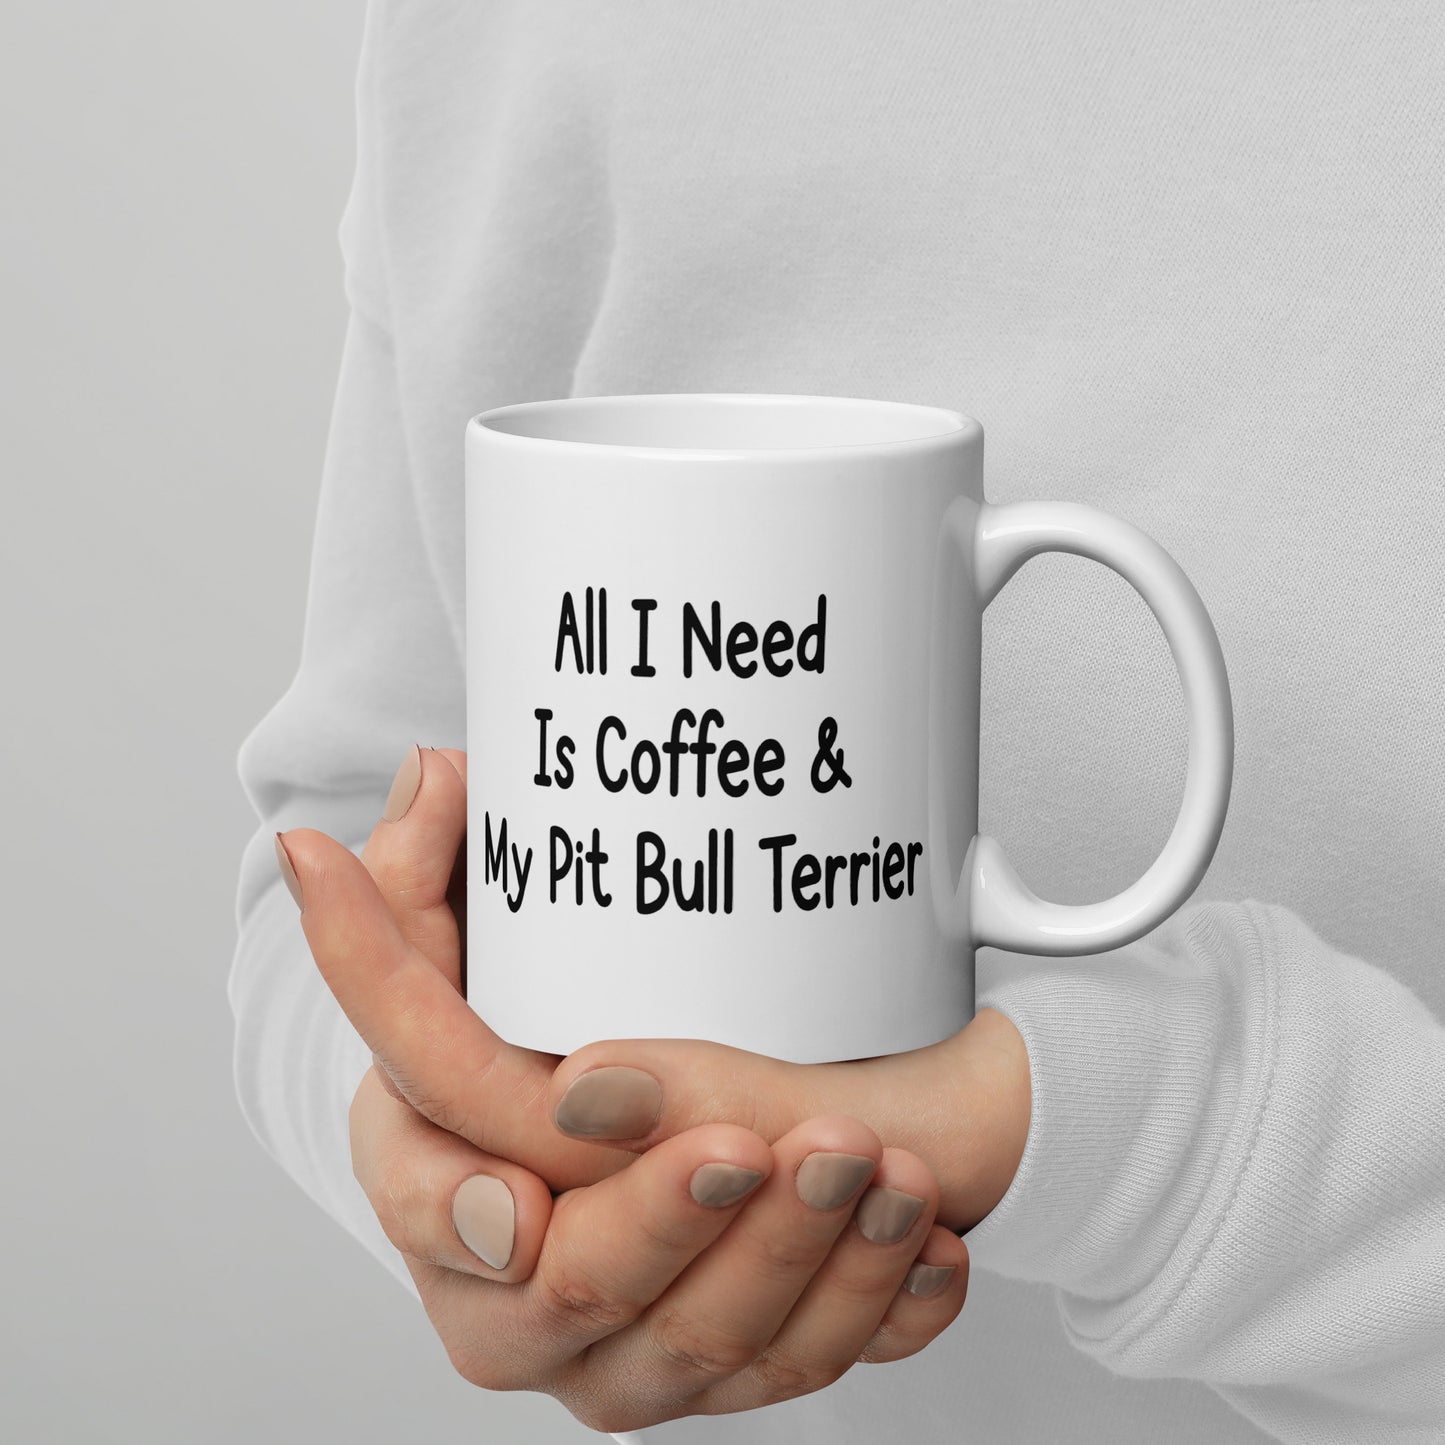 All I need is coffee & my Pit Bull Terrier mug by Dog Artistry.